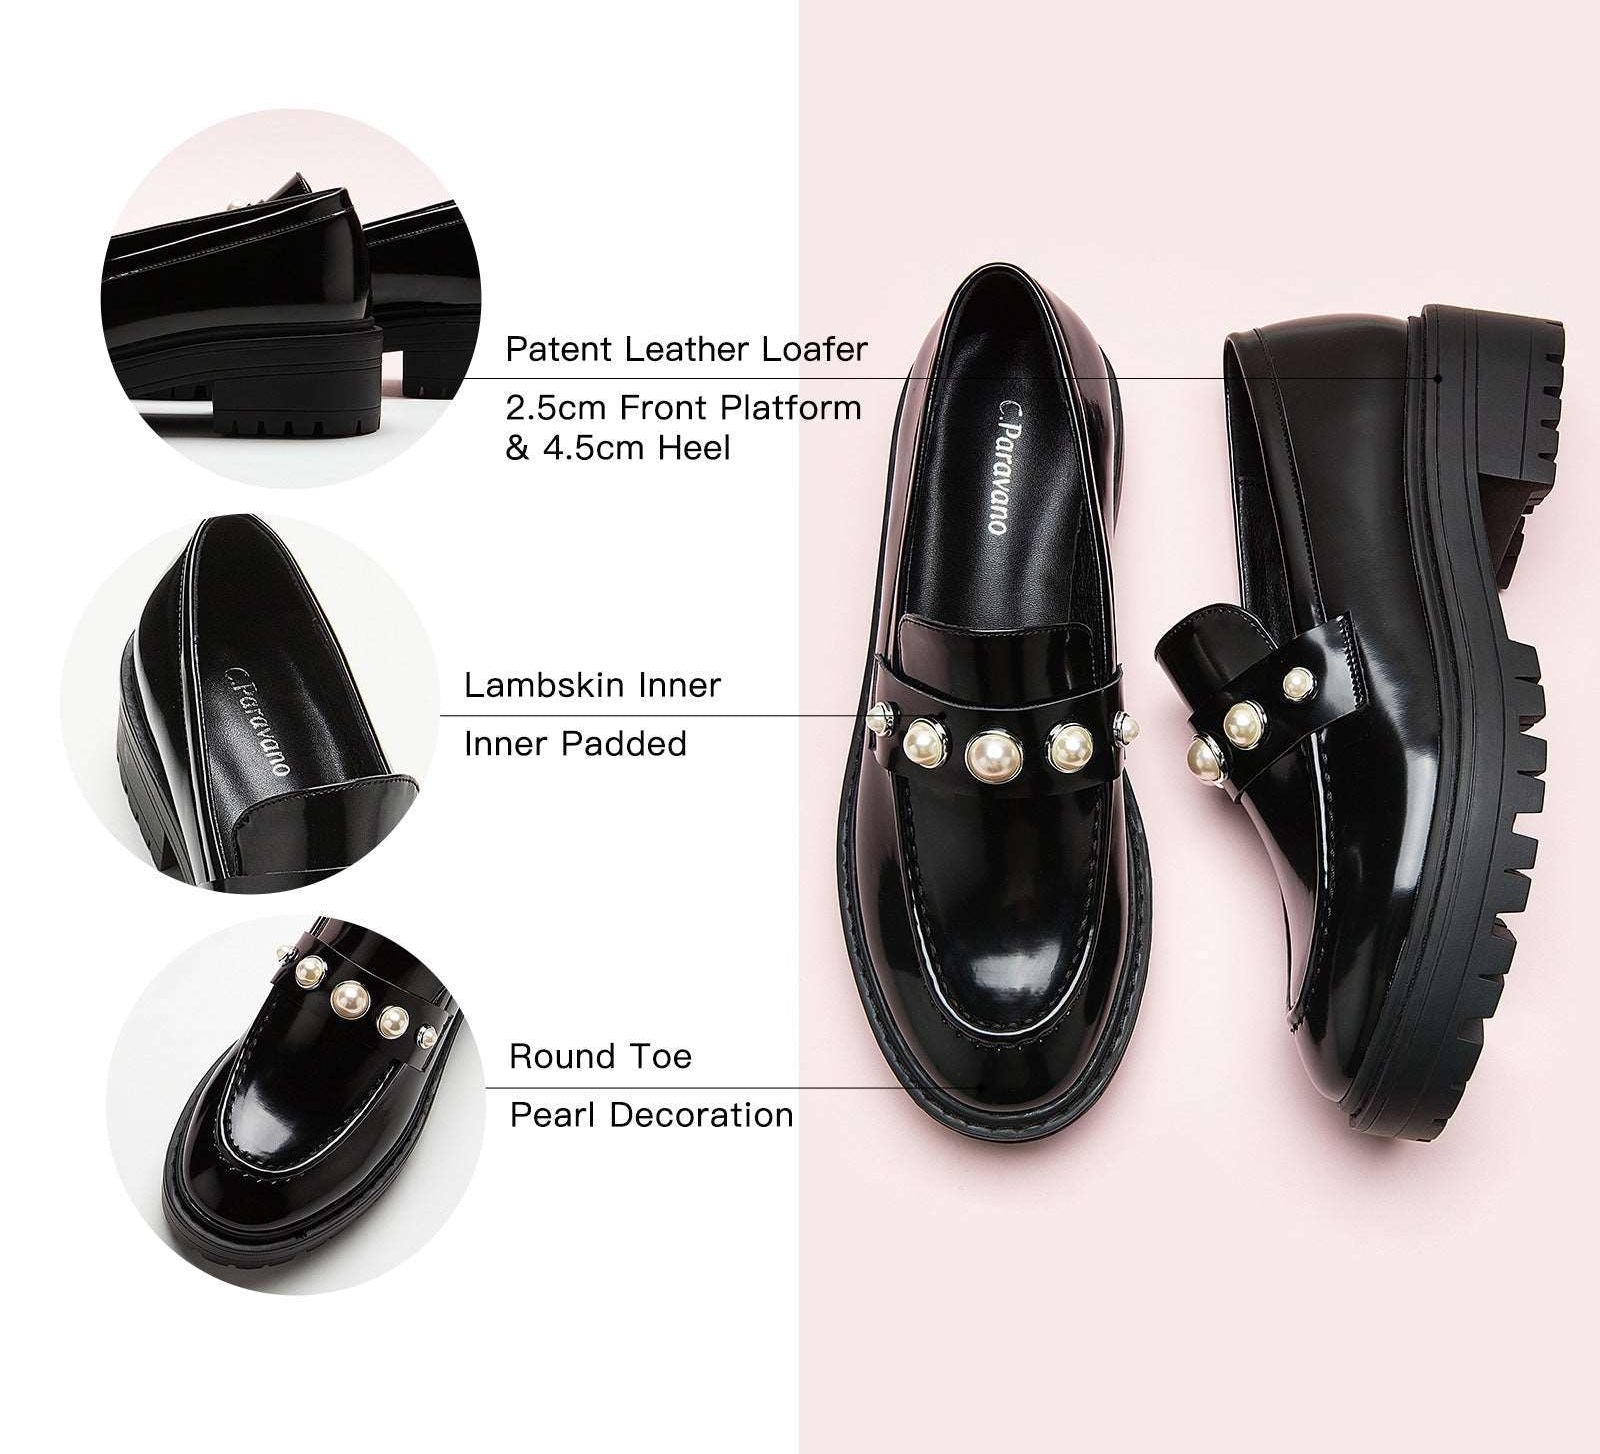  Platform Loafers in Black with distinctive pearl details, a chic and minimalist addition to your footwear collection